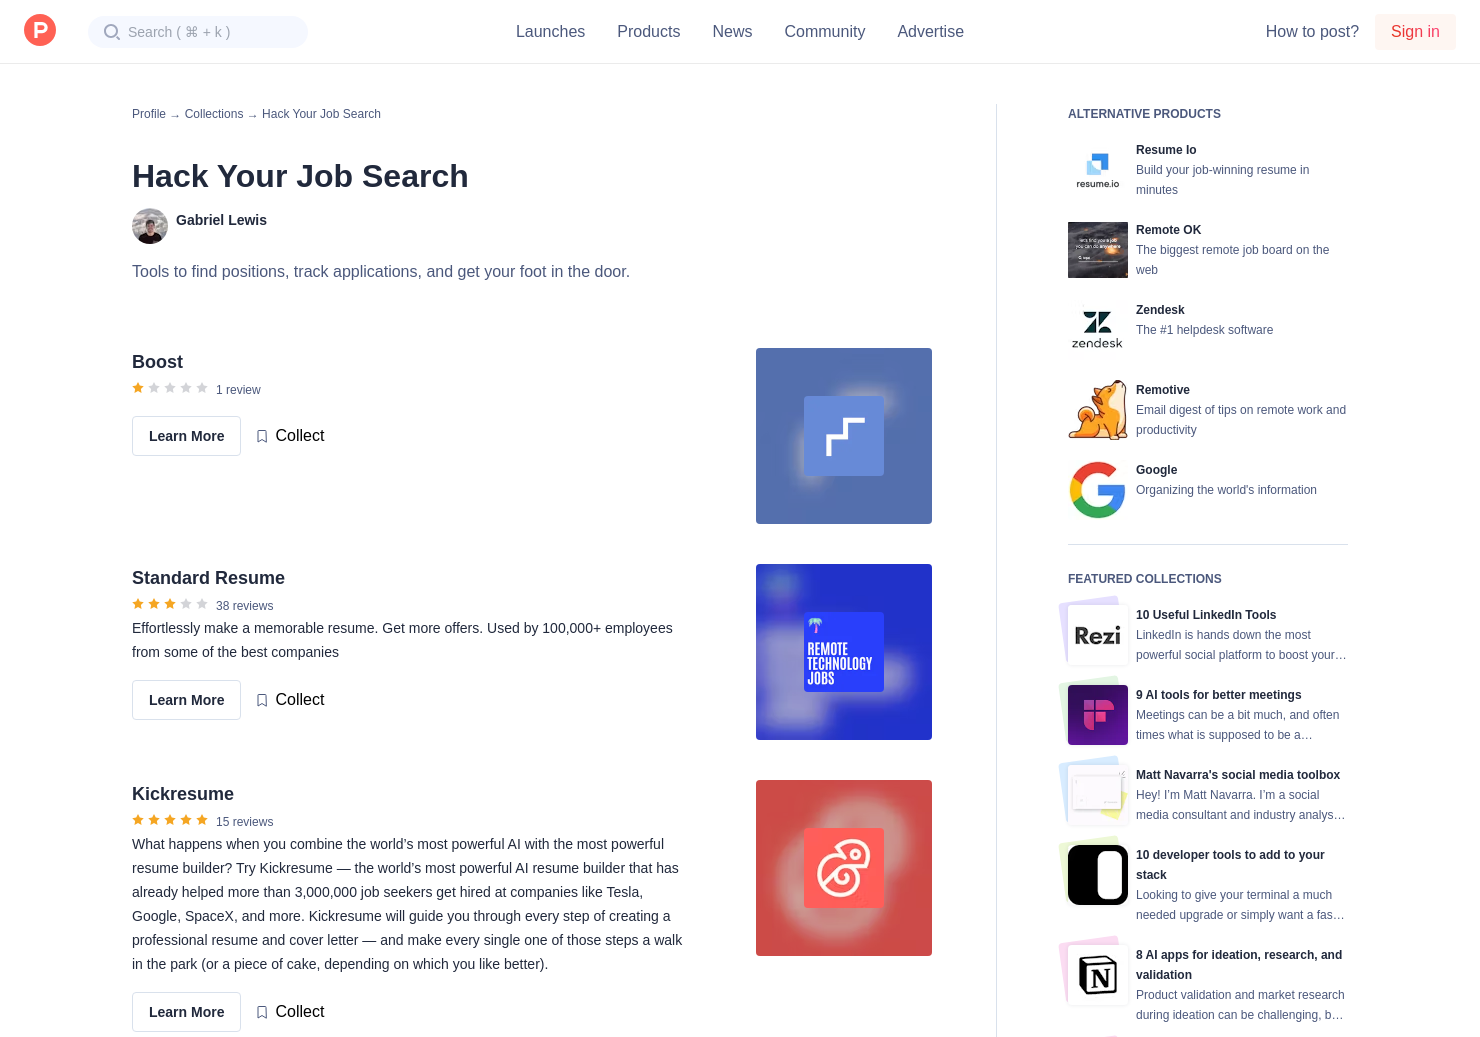 Hack Your Job Search by Gabriel Lewis